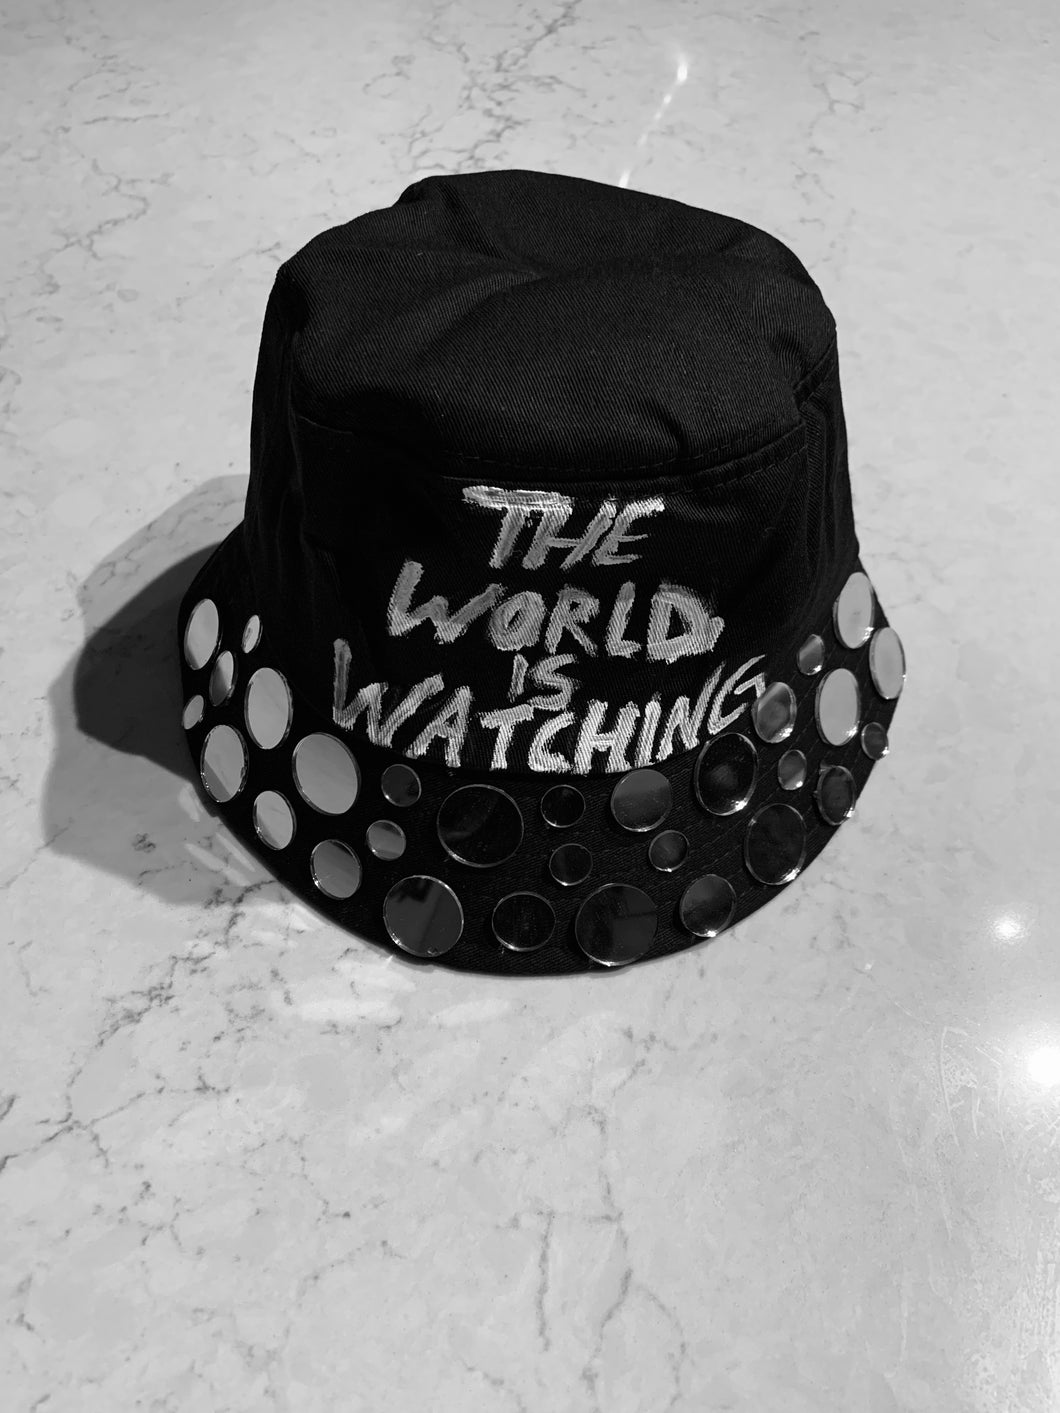 The World is Watching Bucket Hat